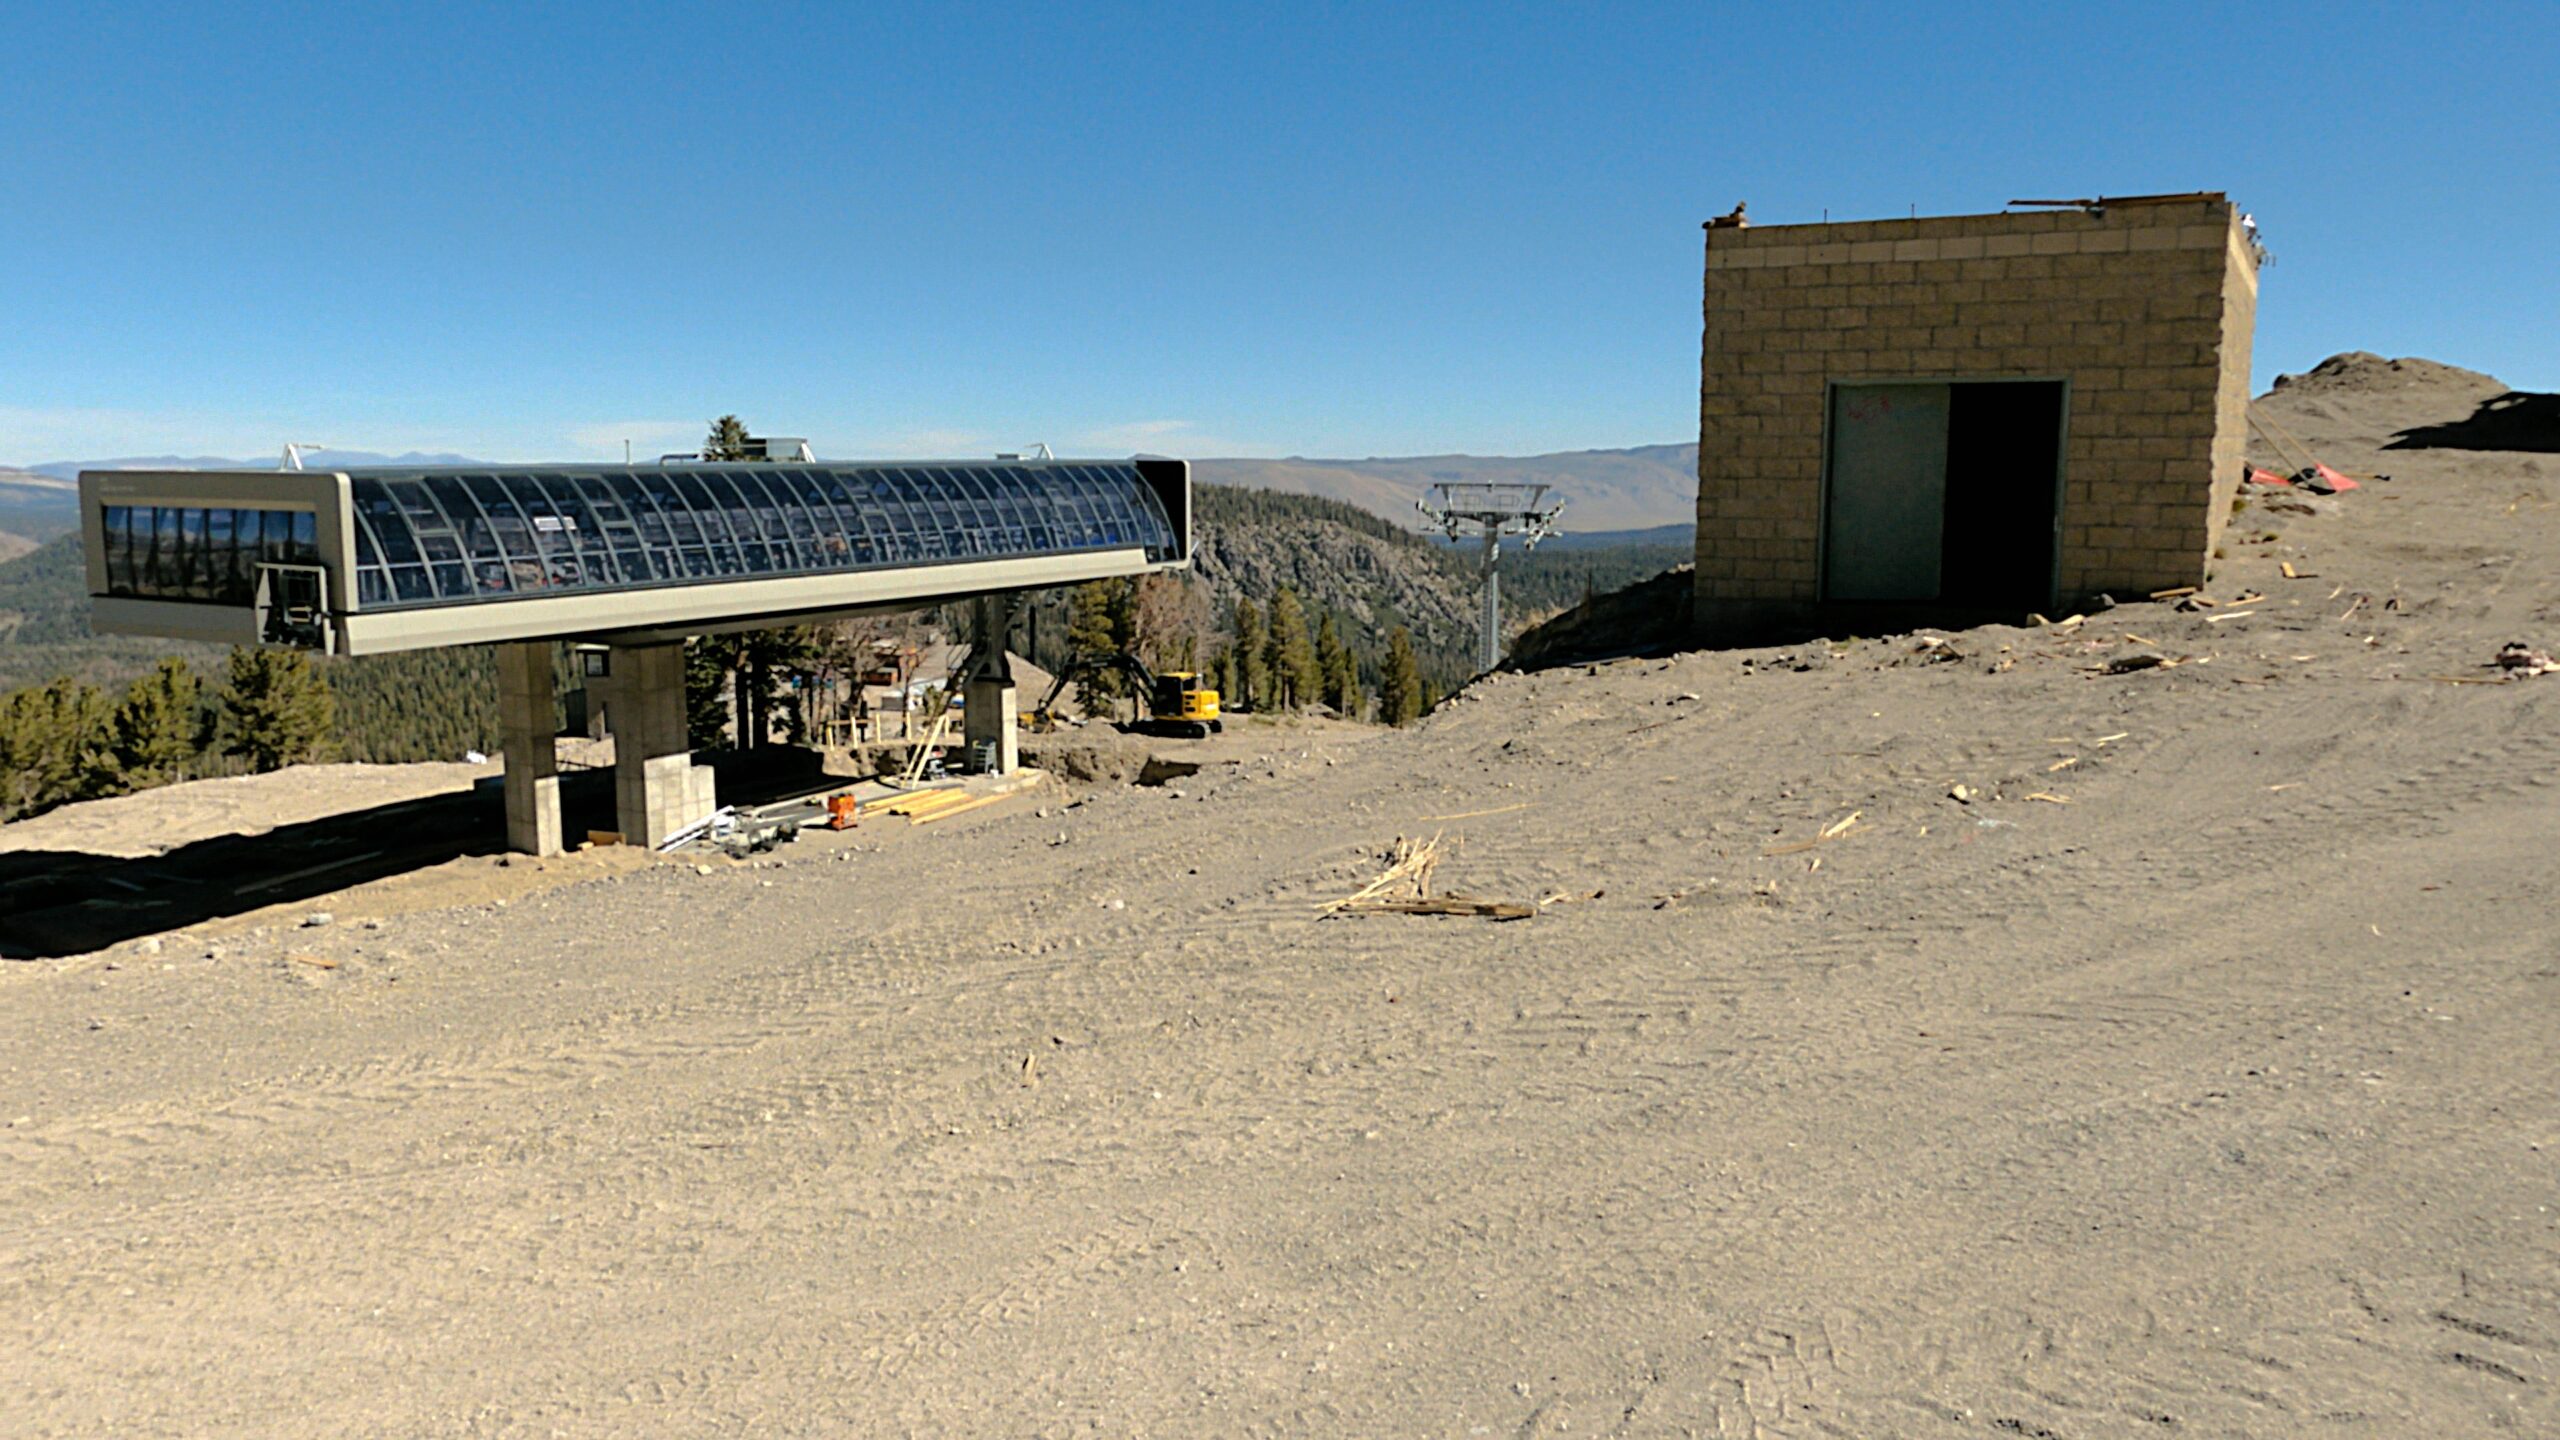 9-24-23 - Standing at the top of the old Chair 16 unloading area. I am looking down at the New Top Station for the 6 Pack Canyon Express being built this Summer & Fall.